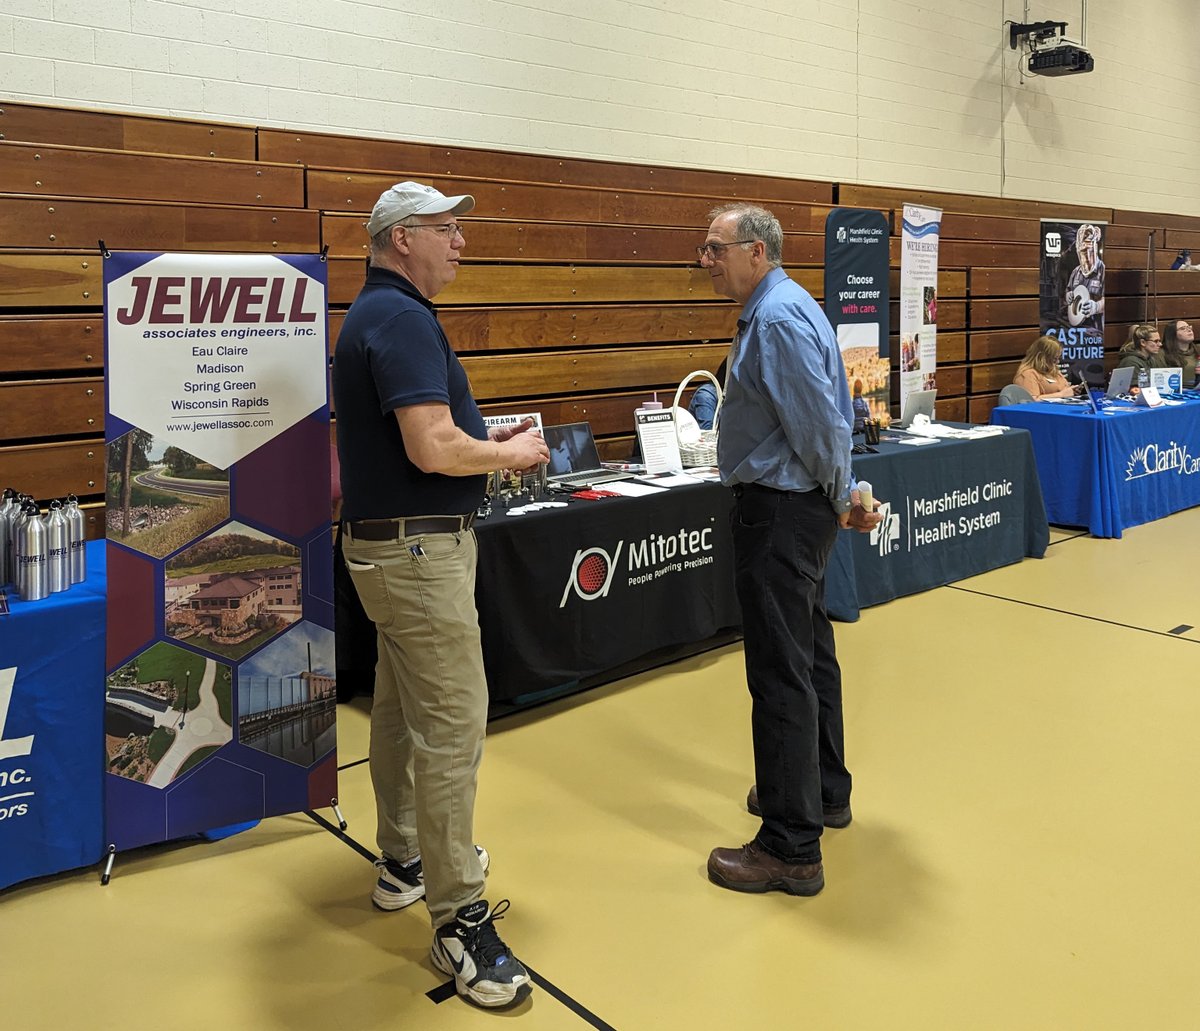 Having a great day at the job fair at Mid-State Technical College in Wisconsin Rapids! Running until 5pm today! #CareerOpportunity #jobseekers